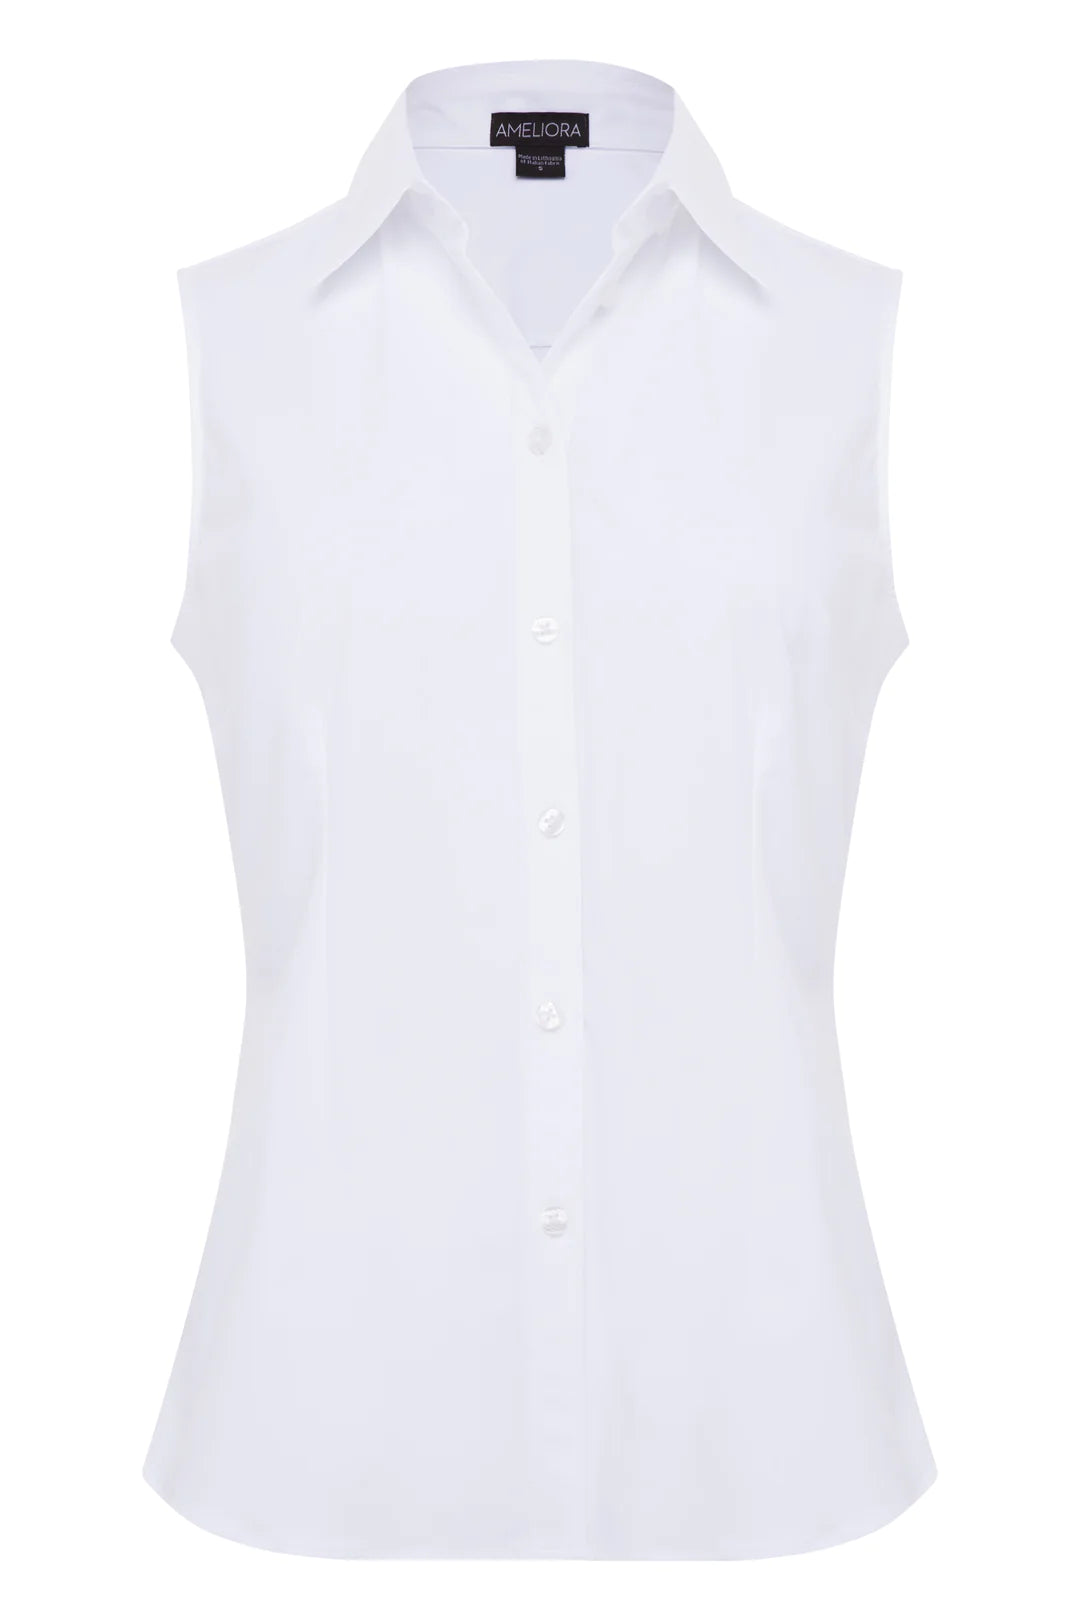 THE ANNIE SLEEVELESS BUTTON UP Shirt In White